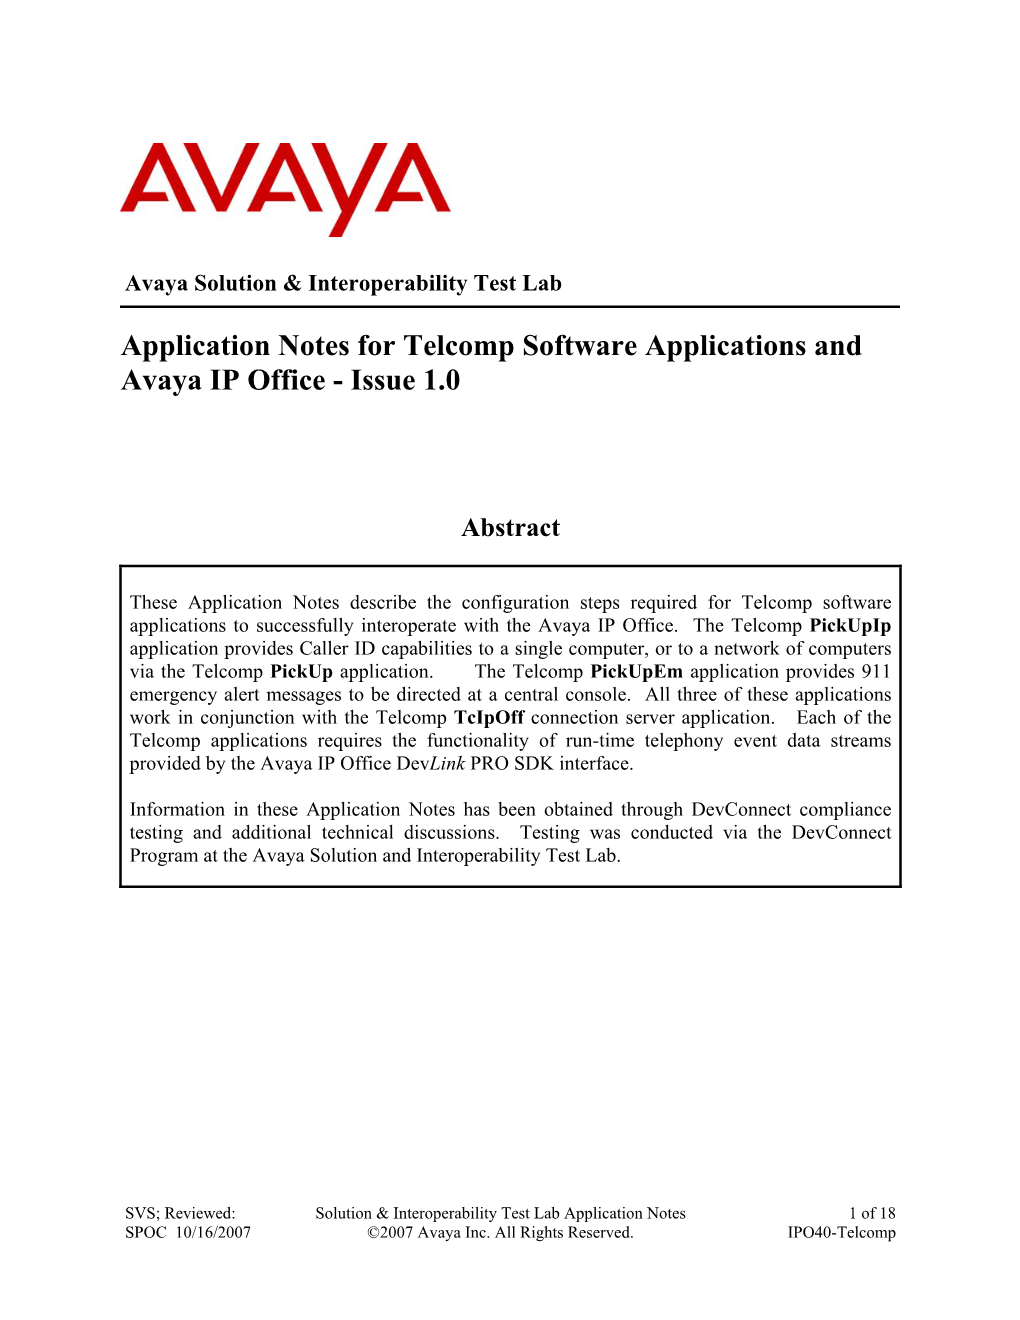 Application Notes for Telcomp Software Applications and Avaya IP Office - Issue 1.0